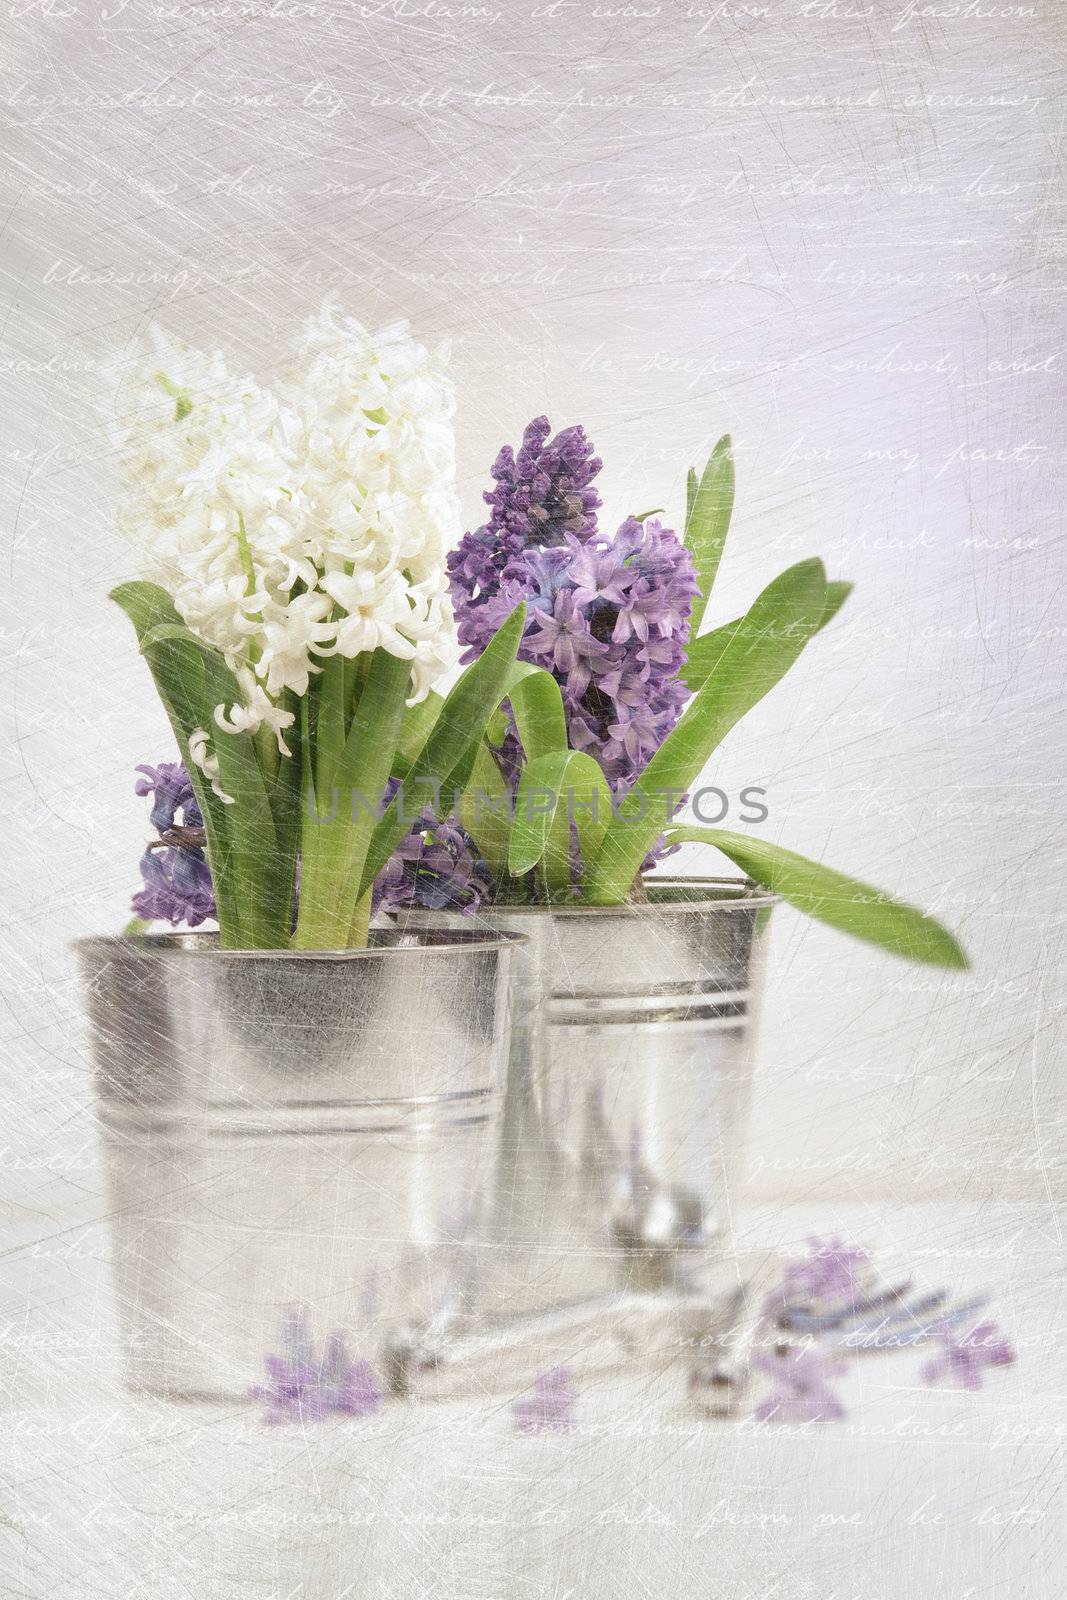 Purple hyacinth with an aged vintage look by Sandralise